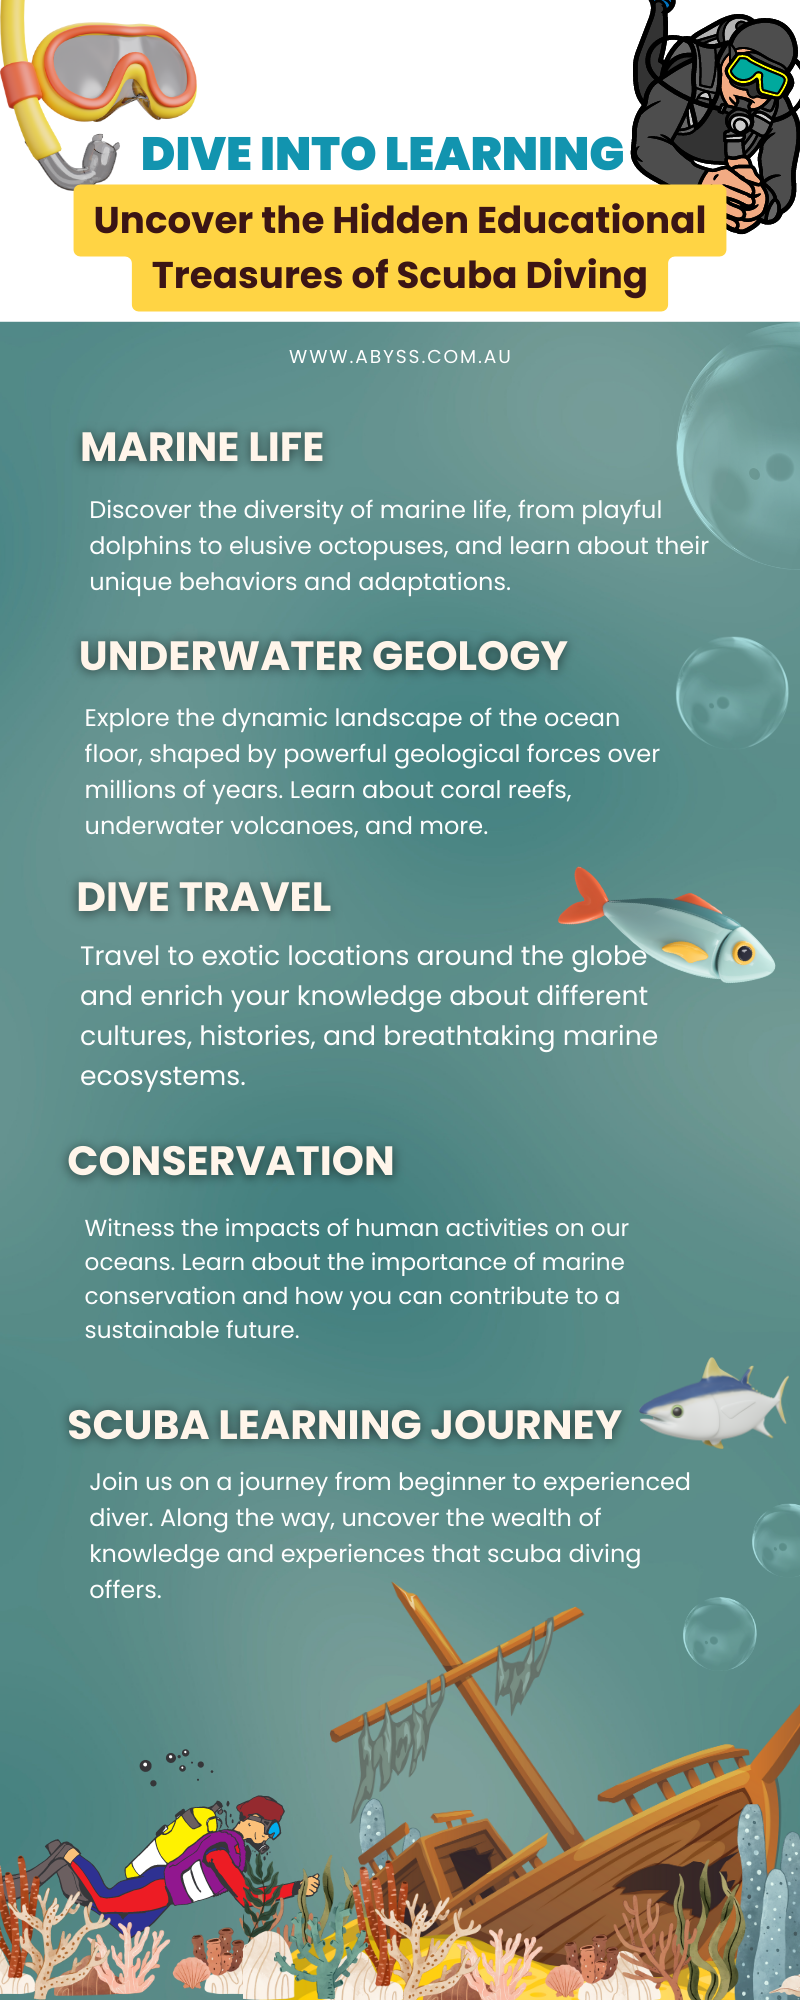 Infographic illustrating the educational benefits of scuba diving, including marine life, underwater geology, dive travel, conservation, and the scuba learning journey.